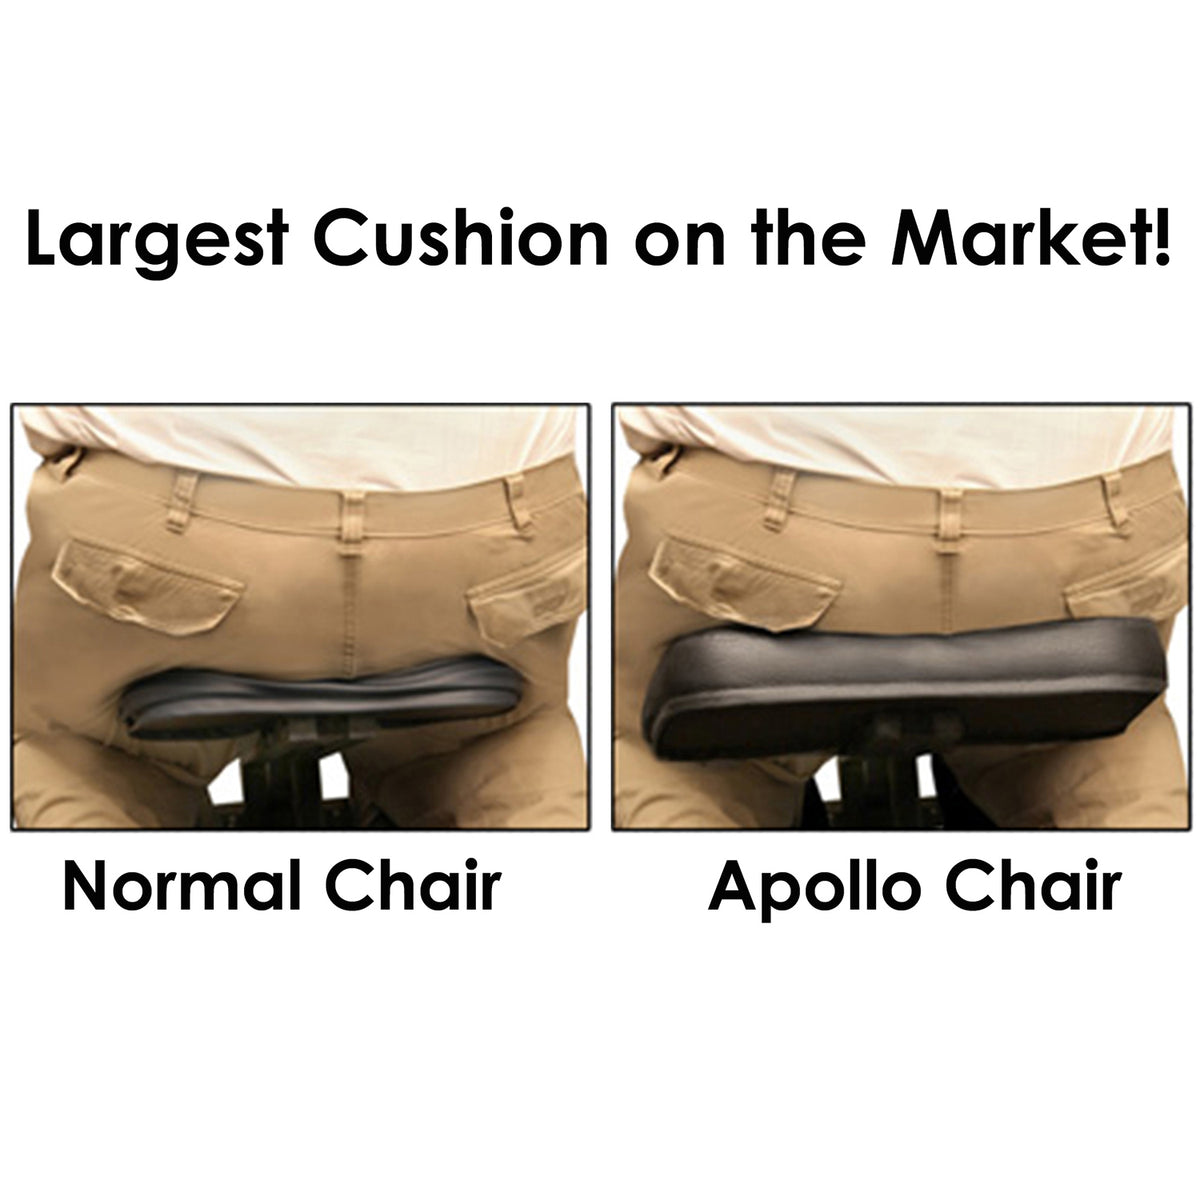 Master Massage - The Husky Apollo Portable Massage Chair with Wheeled Case - Superb Massage Tables